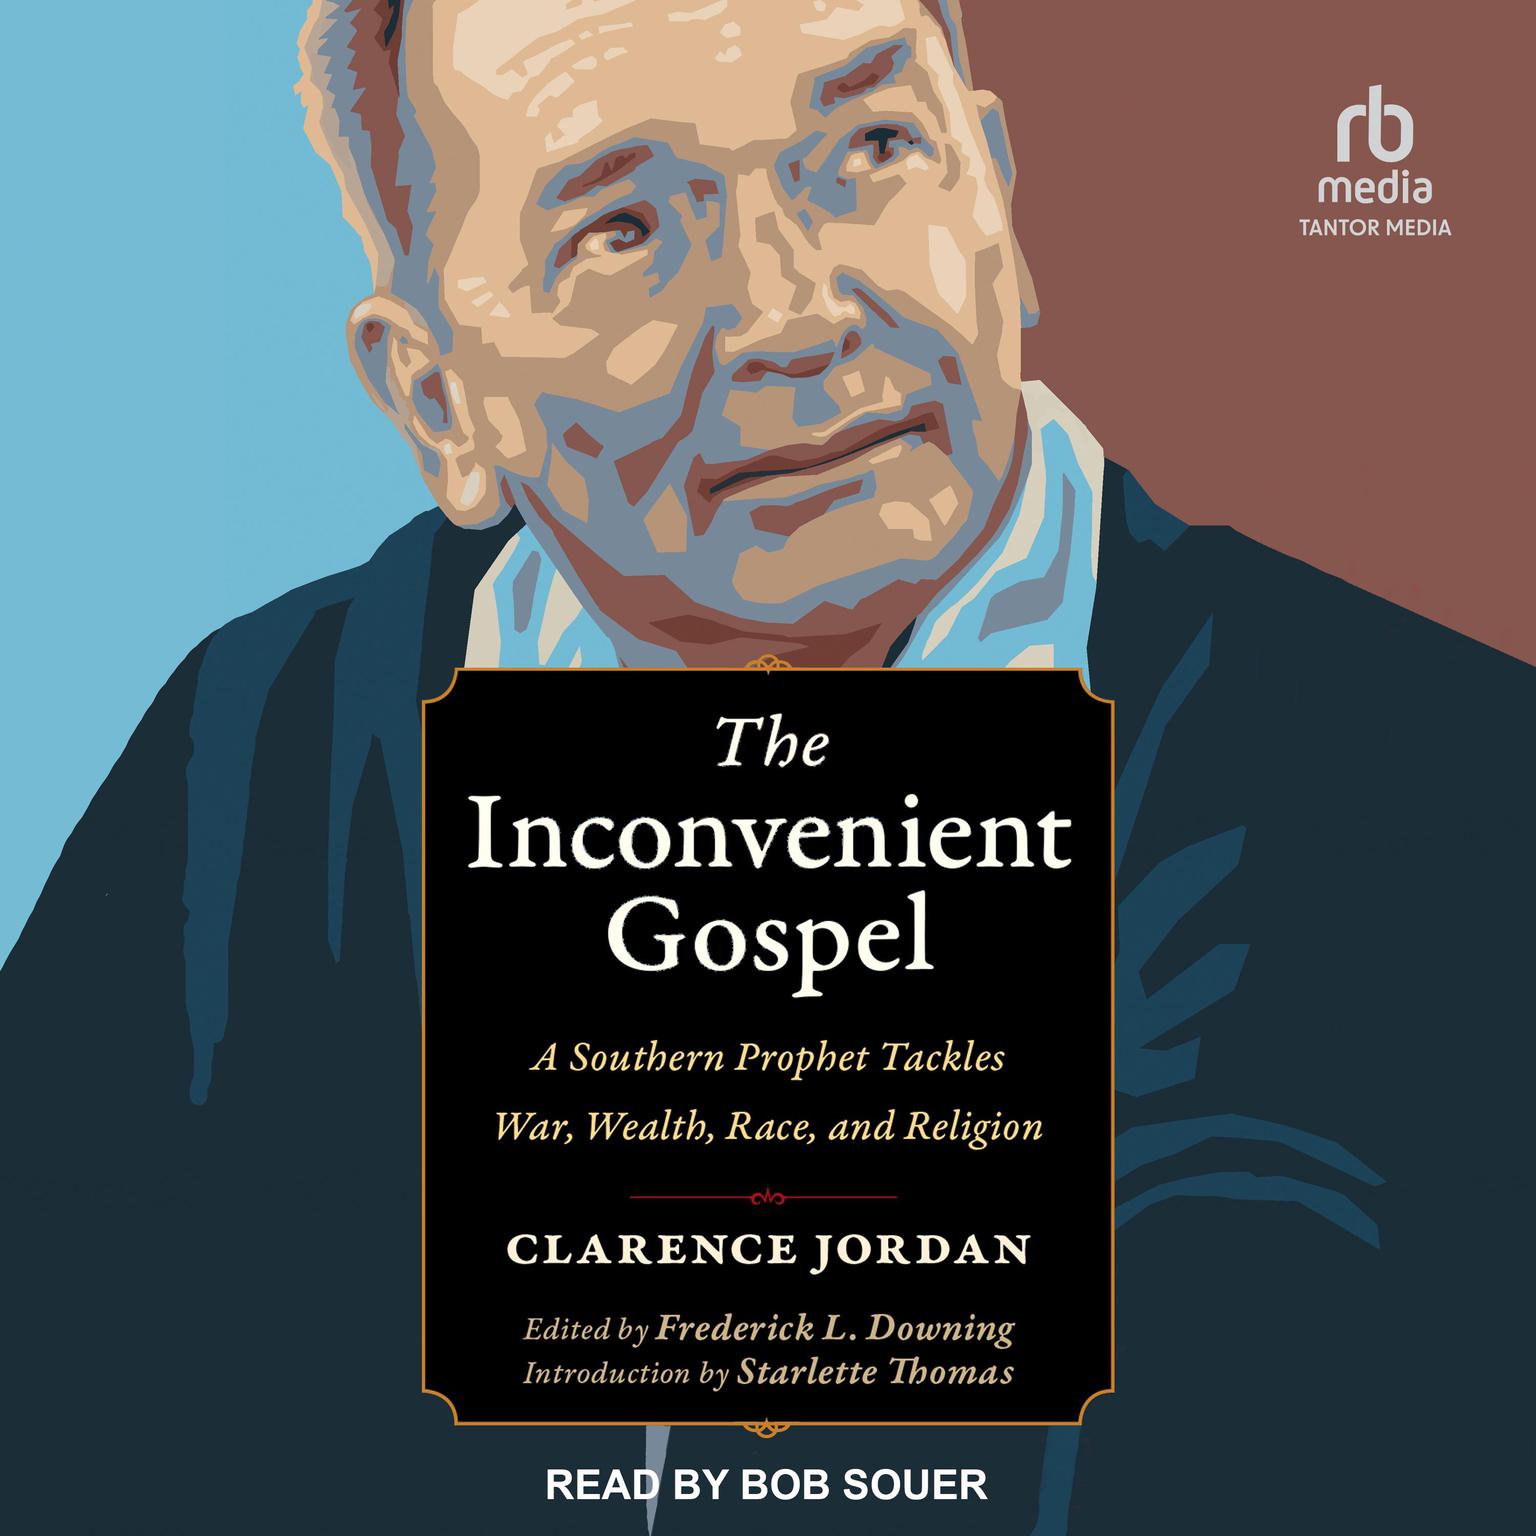 The Inconvenient Gospel: A Southern Prophet Tackles War, Wealth, Race, and Religion Audiobook, by Clarence Jordan